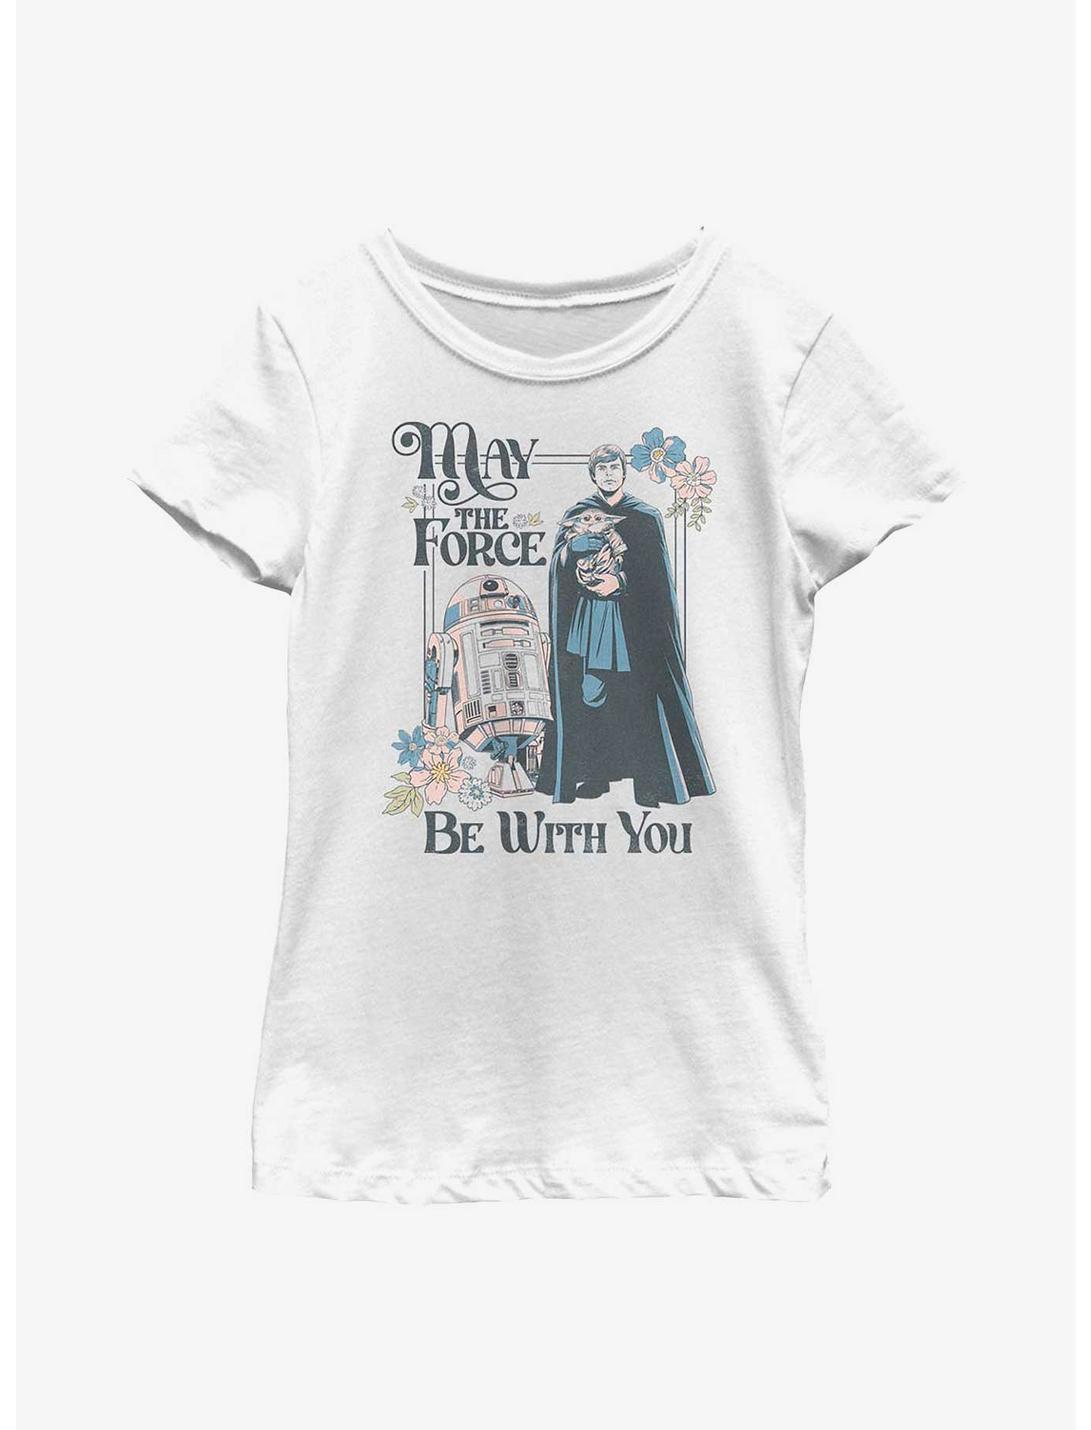 Star Wars The Mandalorian May The Force Be With You Floral Youth Girls T-Shirt, WHITE, hi-res